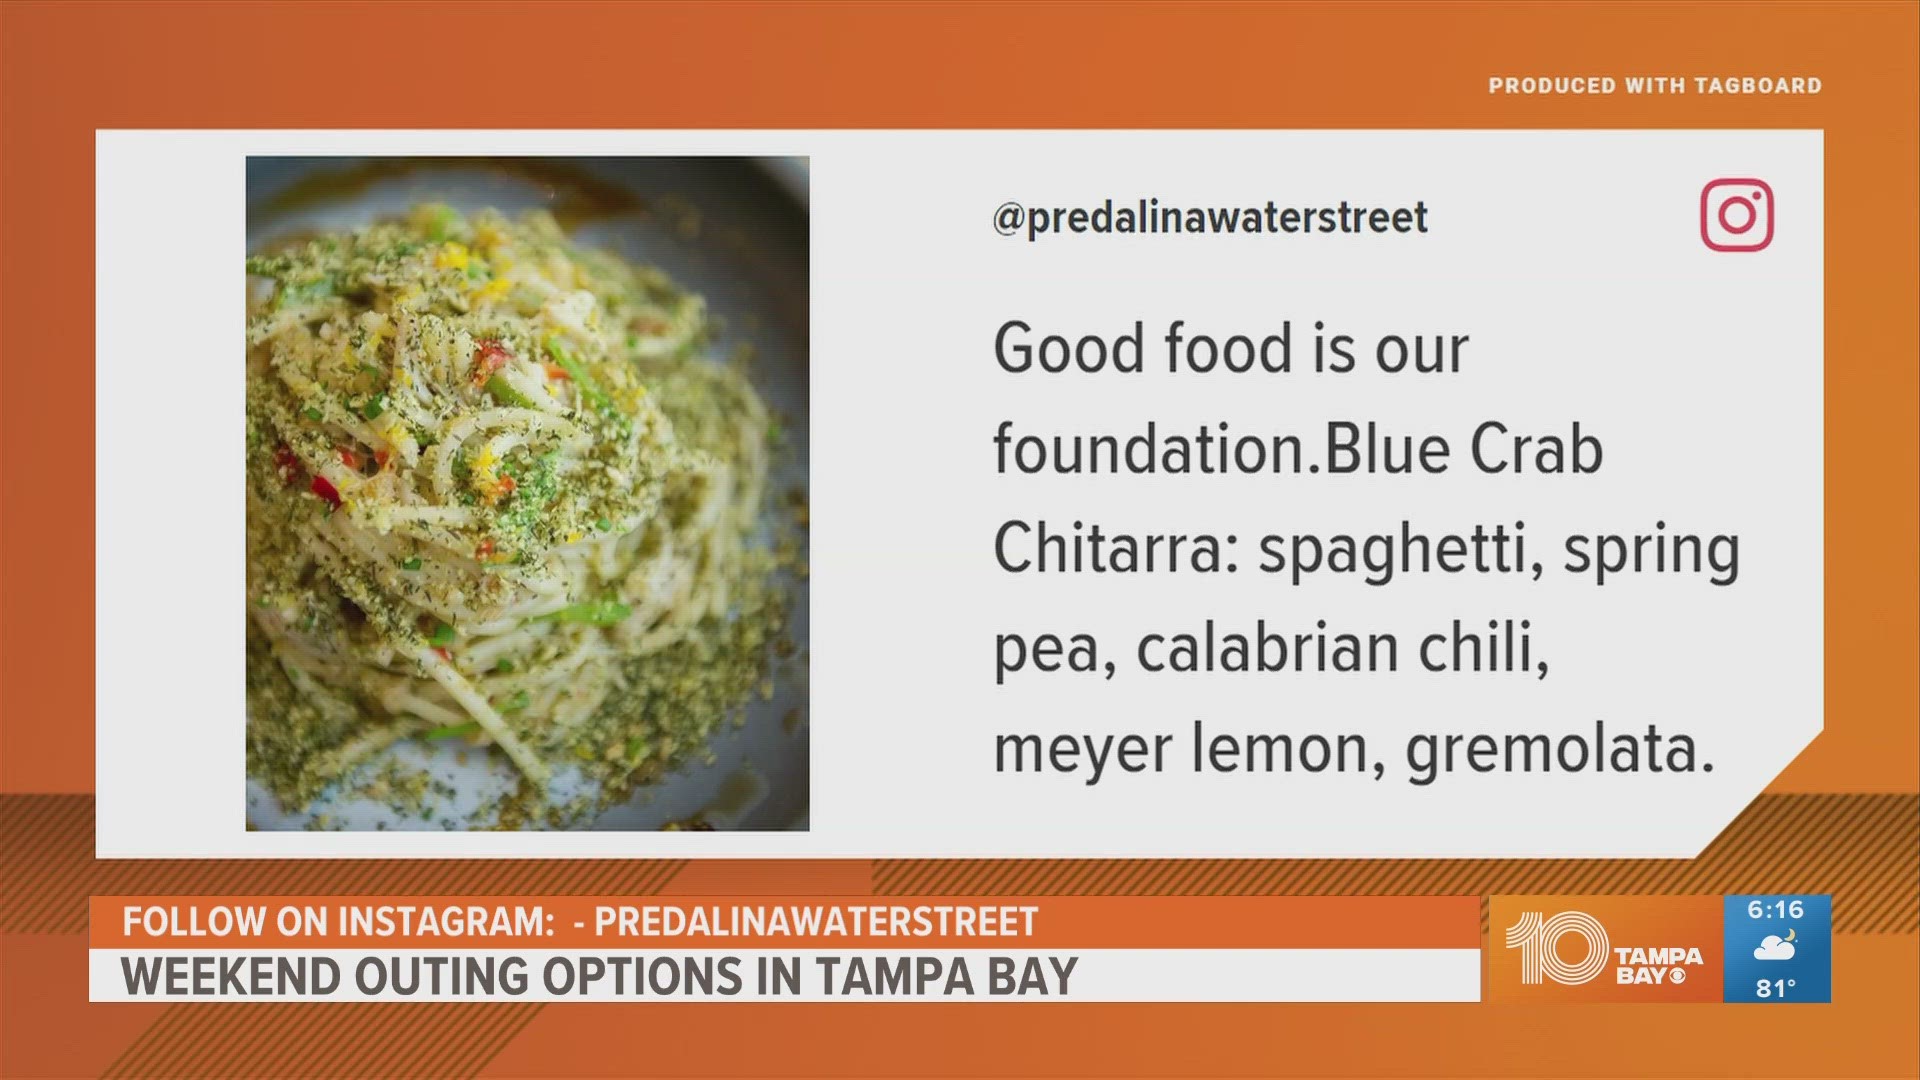 If you’re looking for something to do this weekend, you may want to check out Predalina on Water Street in Tampa.